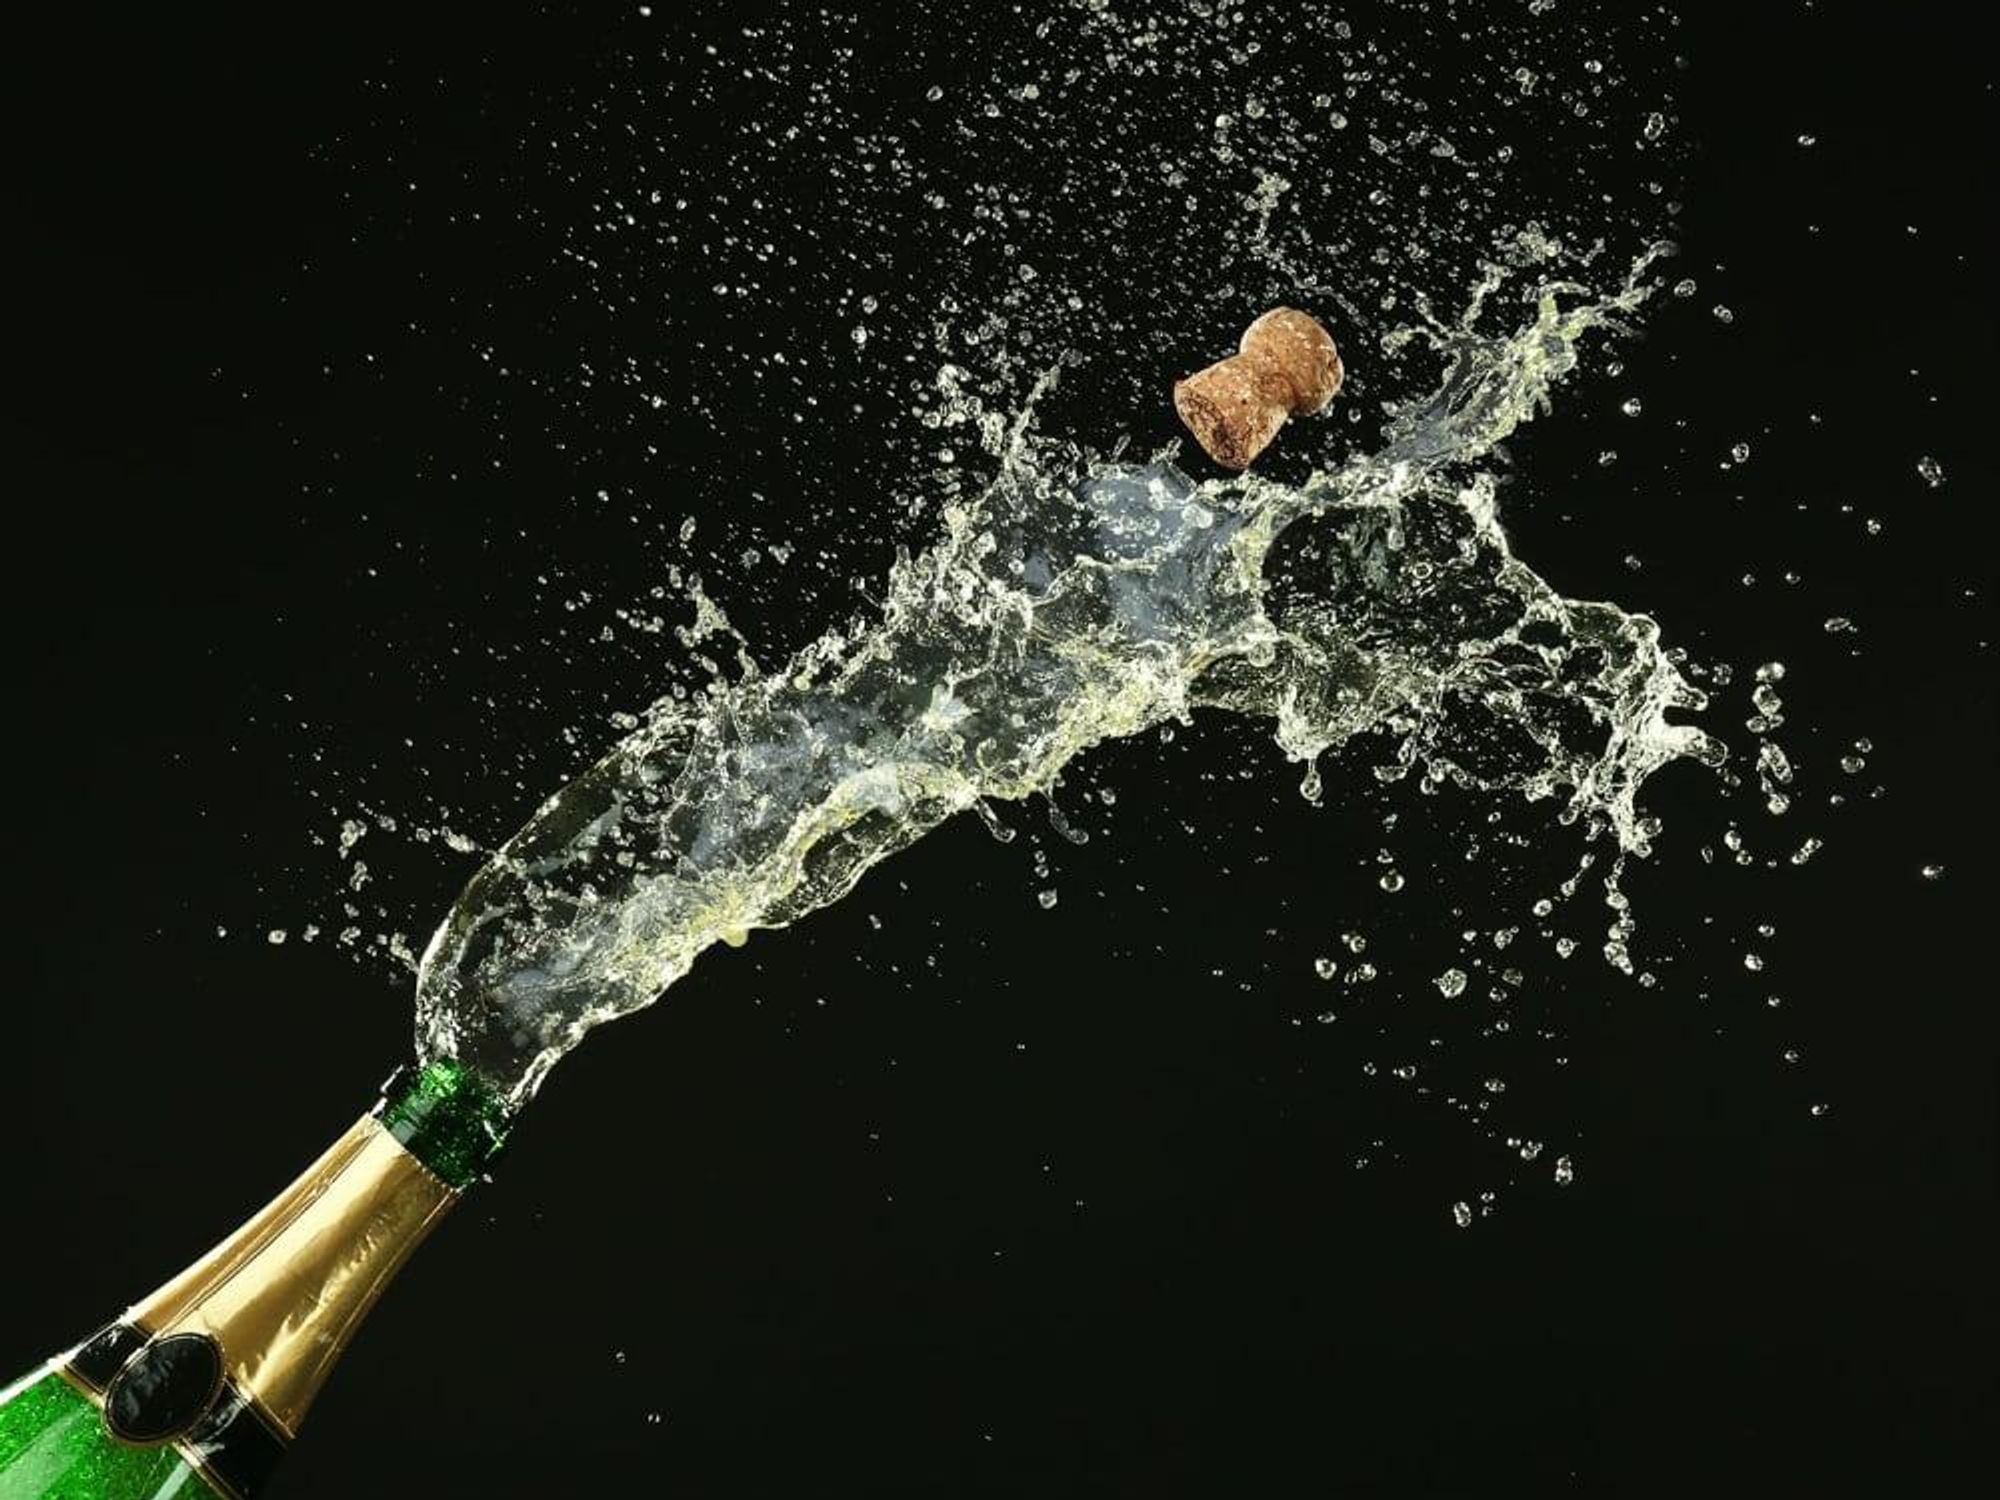 Champagne popping - New Year's Eve